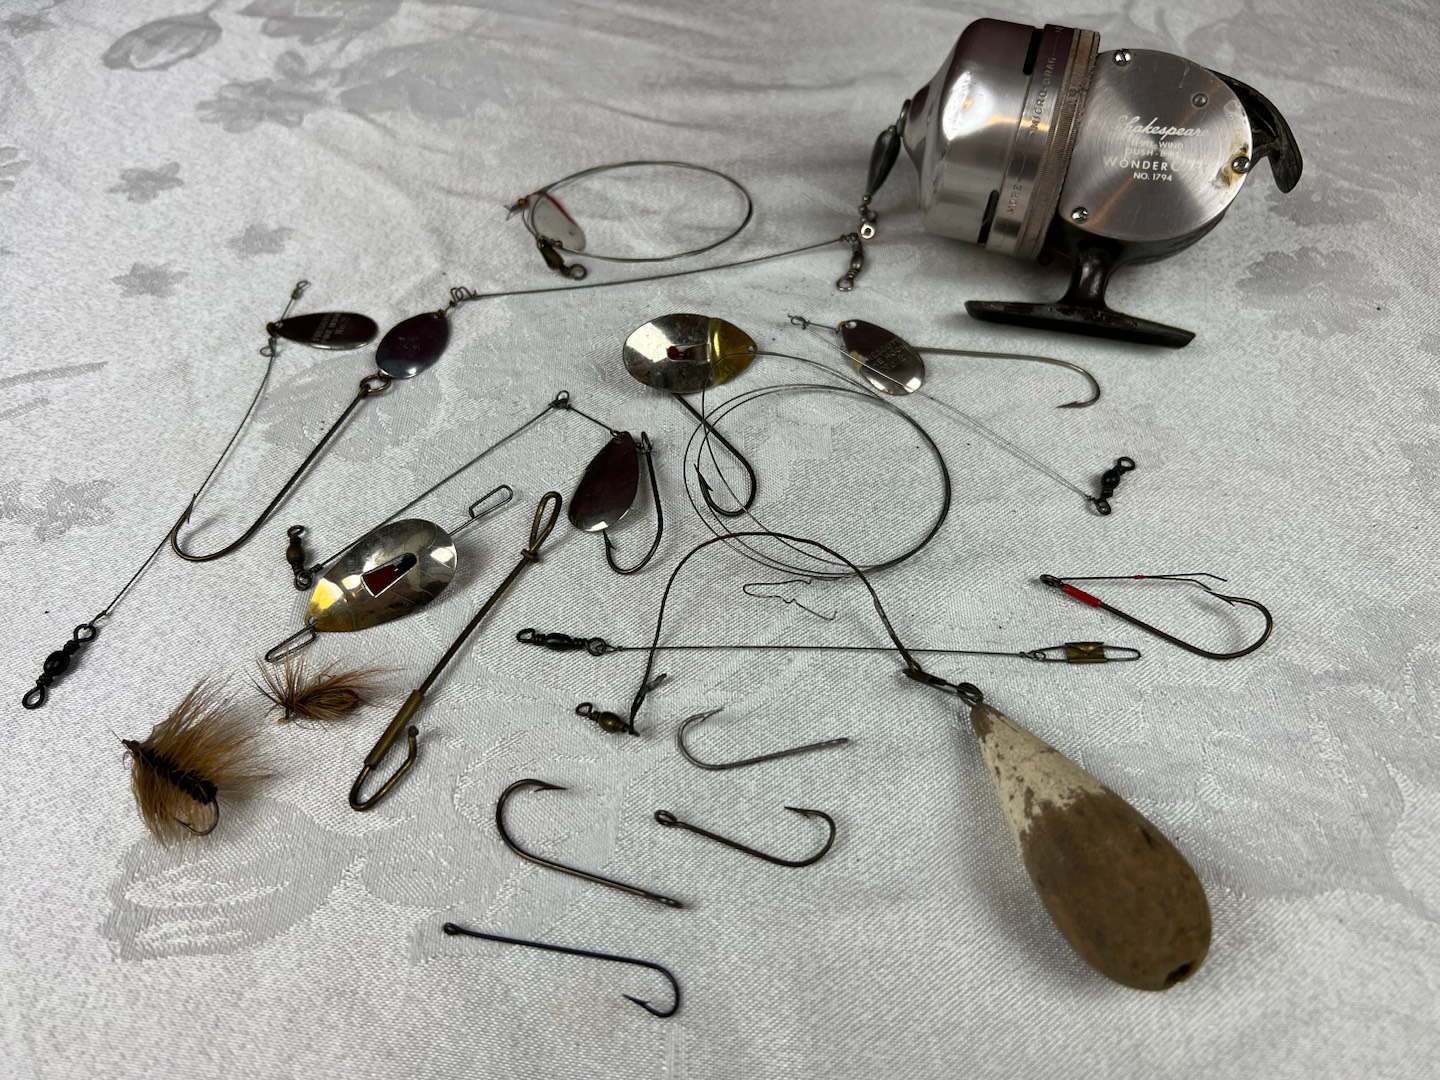 Norm Taniguchi Estate Auction, Fishing Gear, tools & More